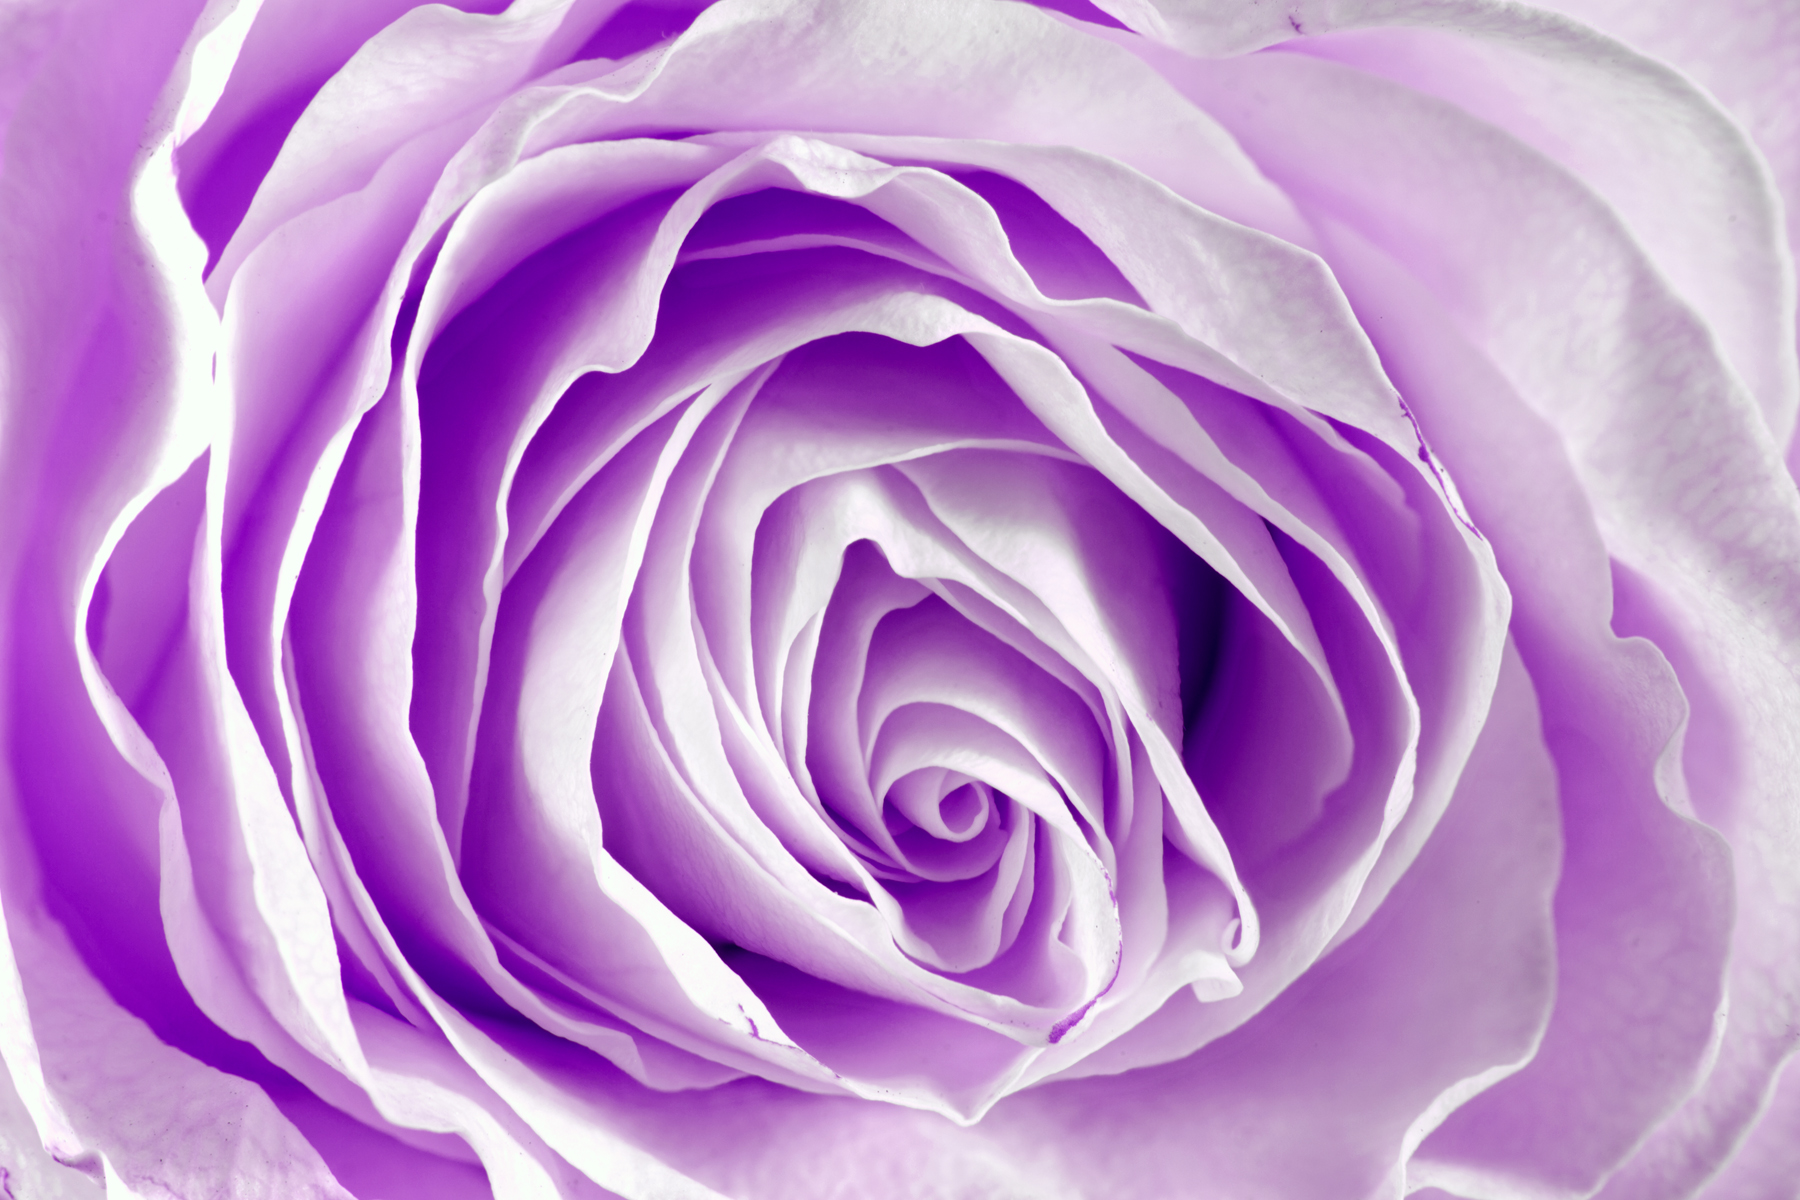 Lavender Rose Wallpaper High Definition Quality Widescreen